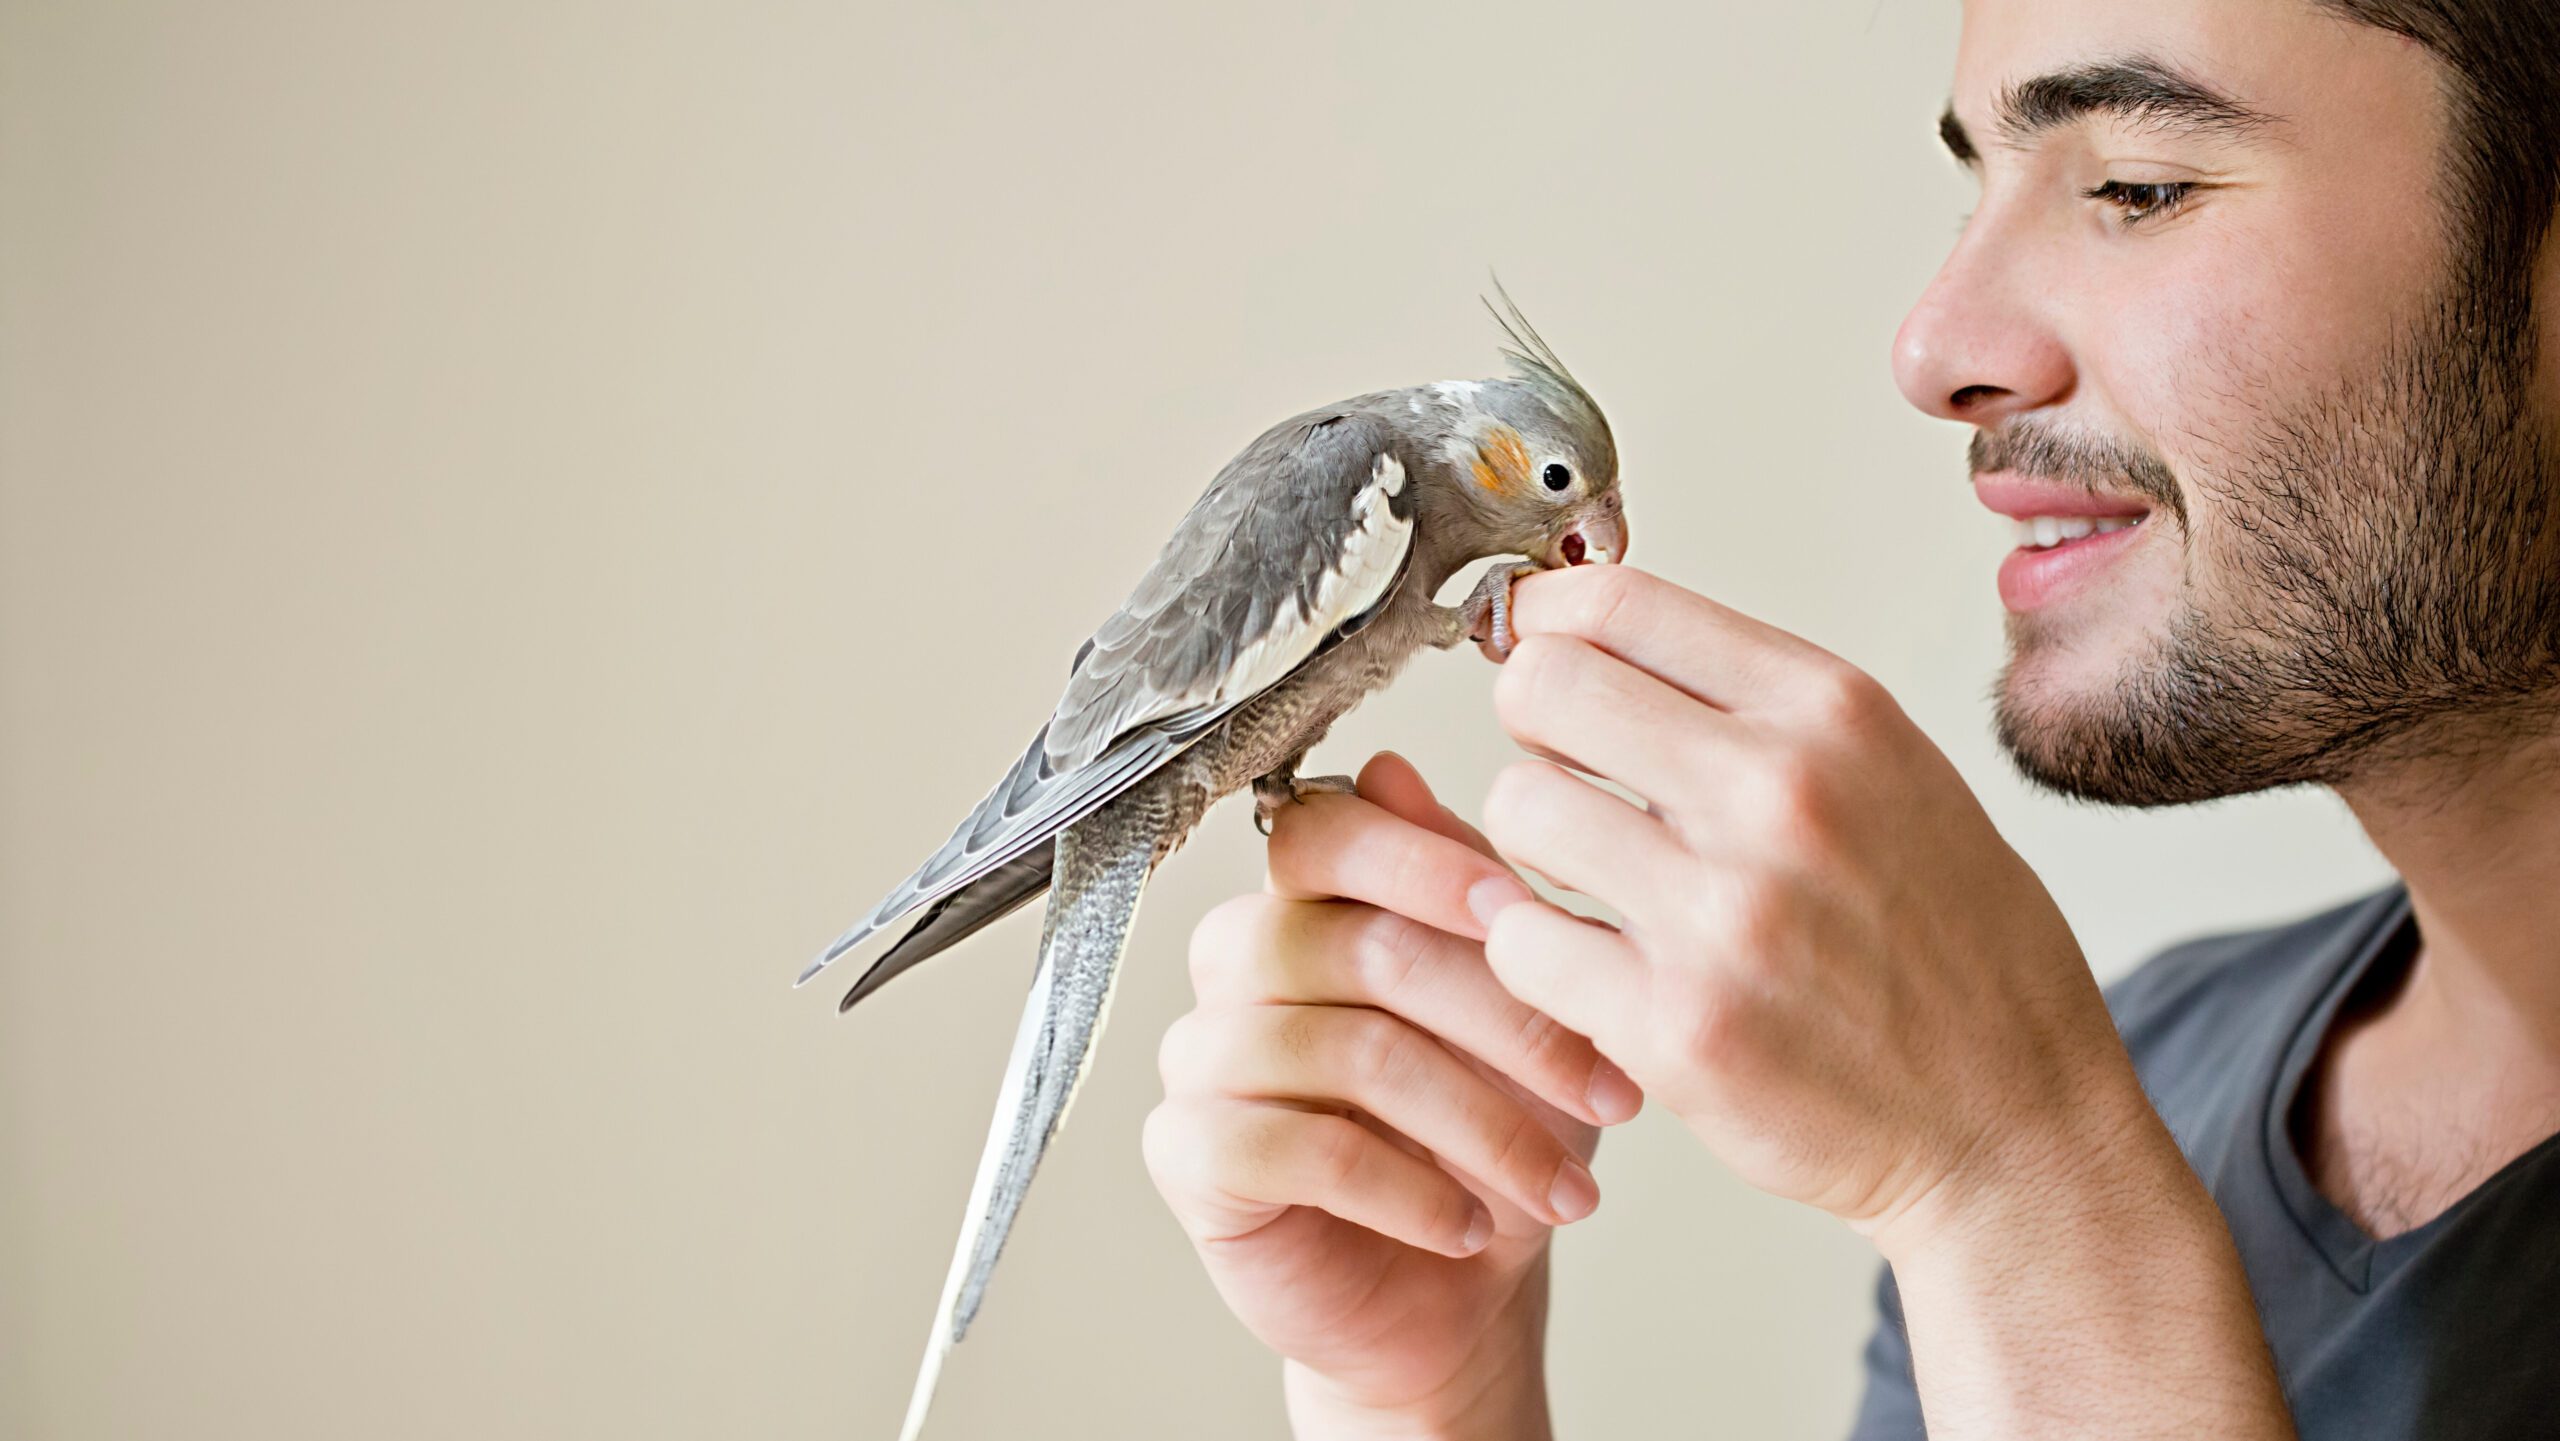 Bird care = bird play! Birds need time out of their cages to play and interact with their human owners.